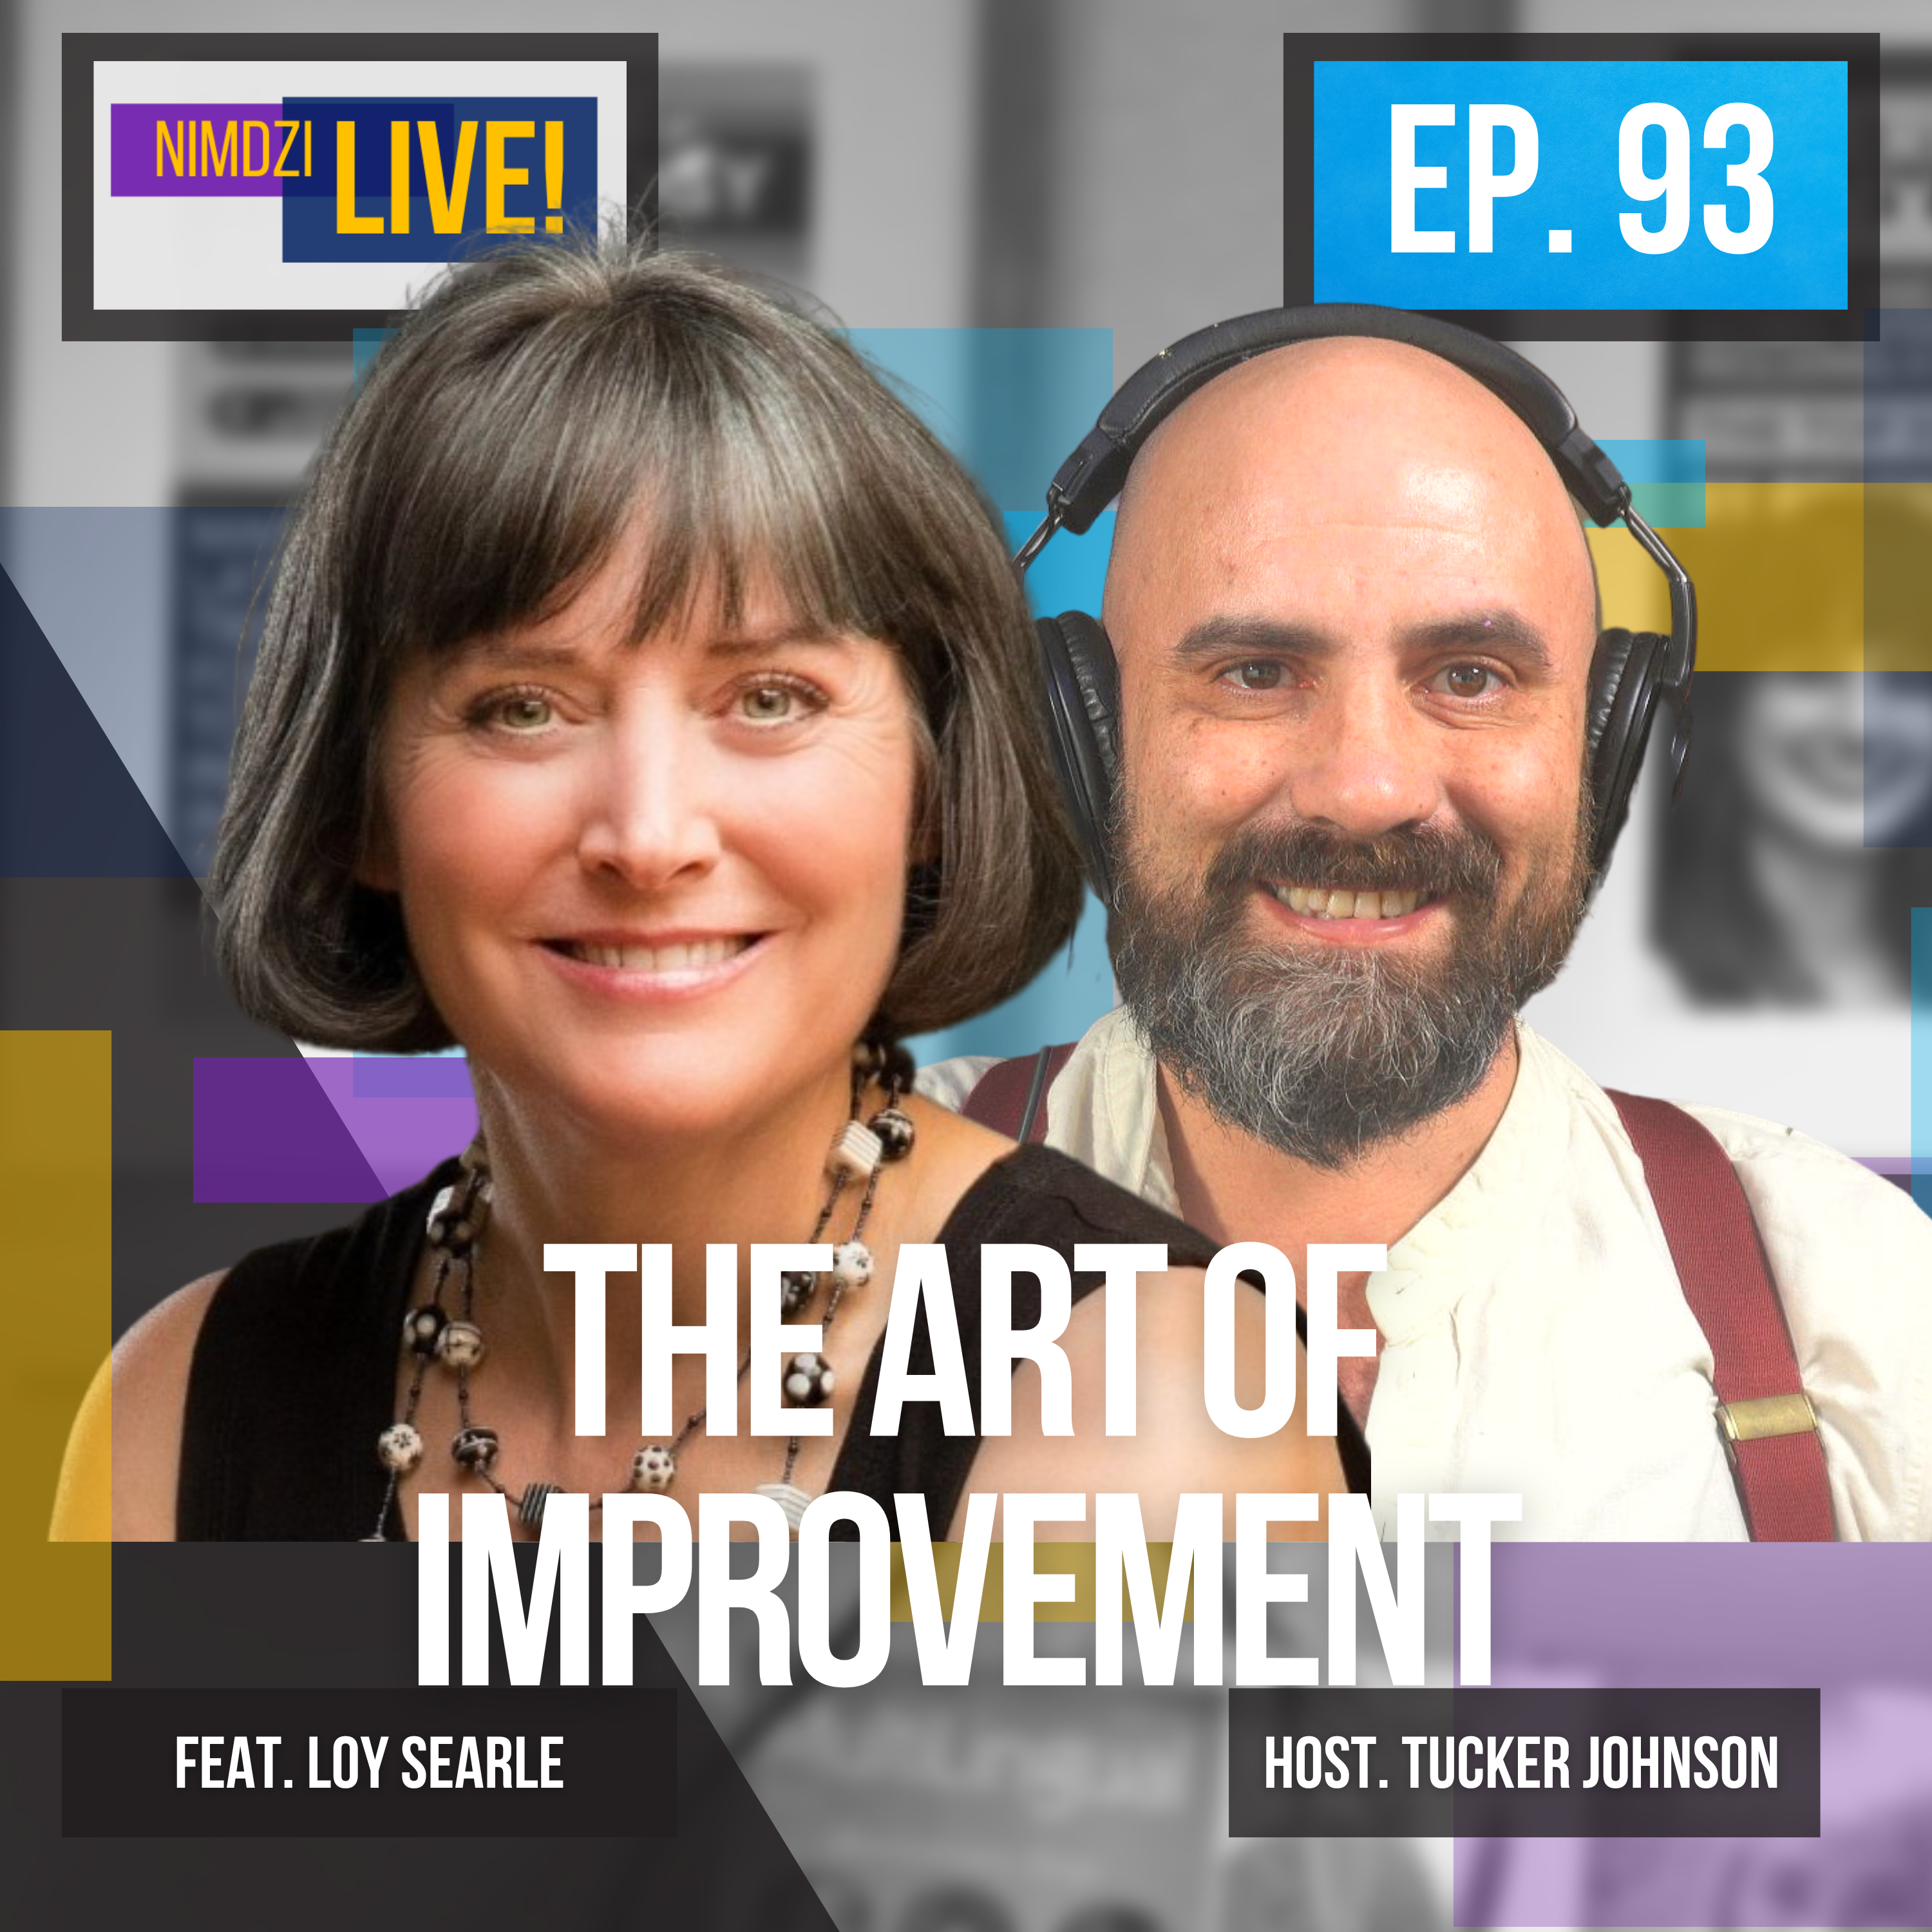 The art of improvement feat. Loy Searle